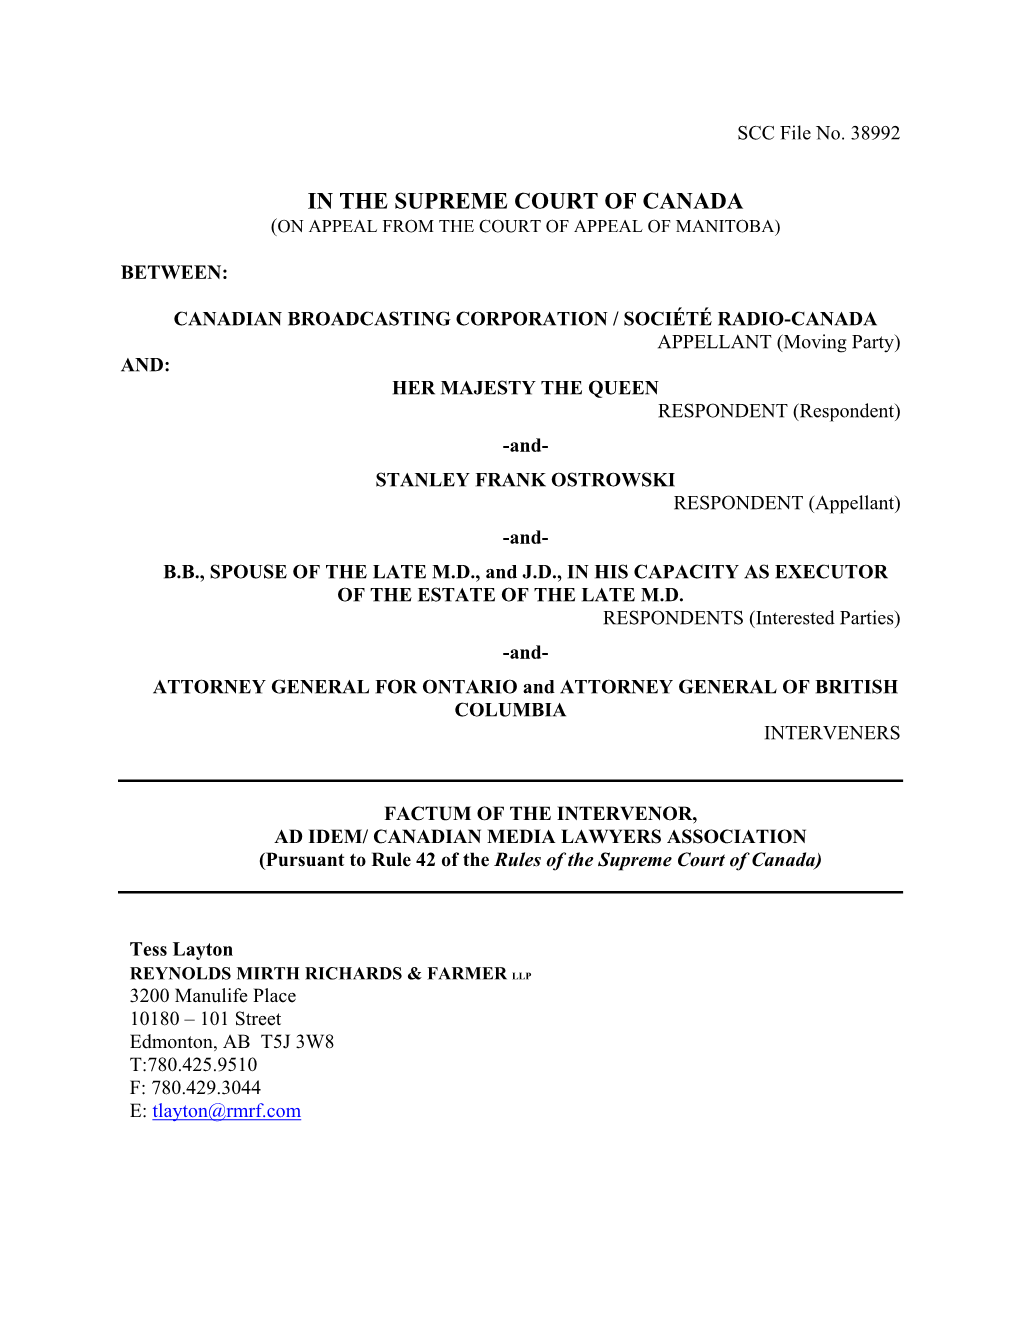 In the Supreme Court of Canada (On Appeal from the Court of Appeal of Manitoba)